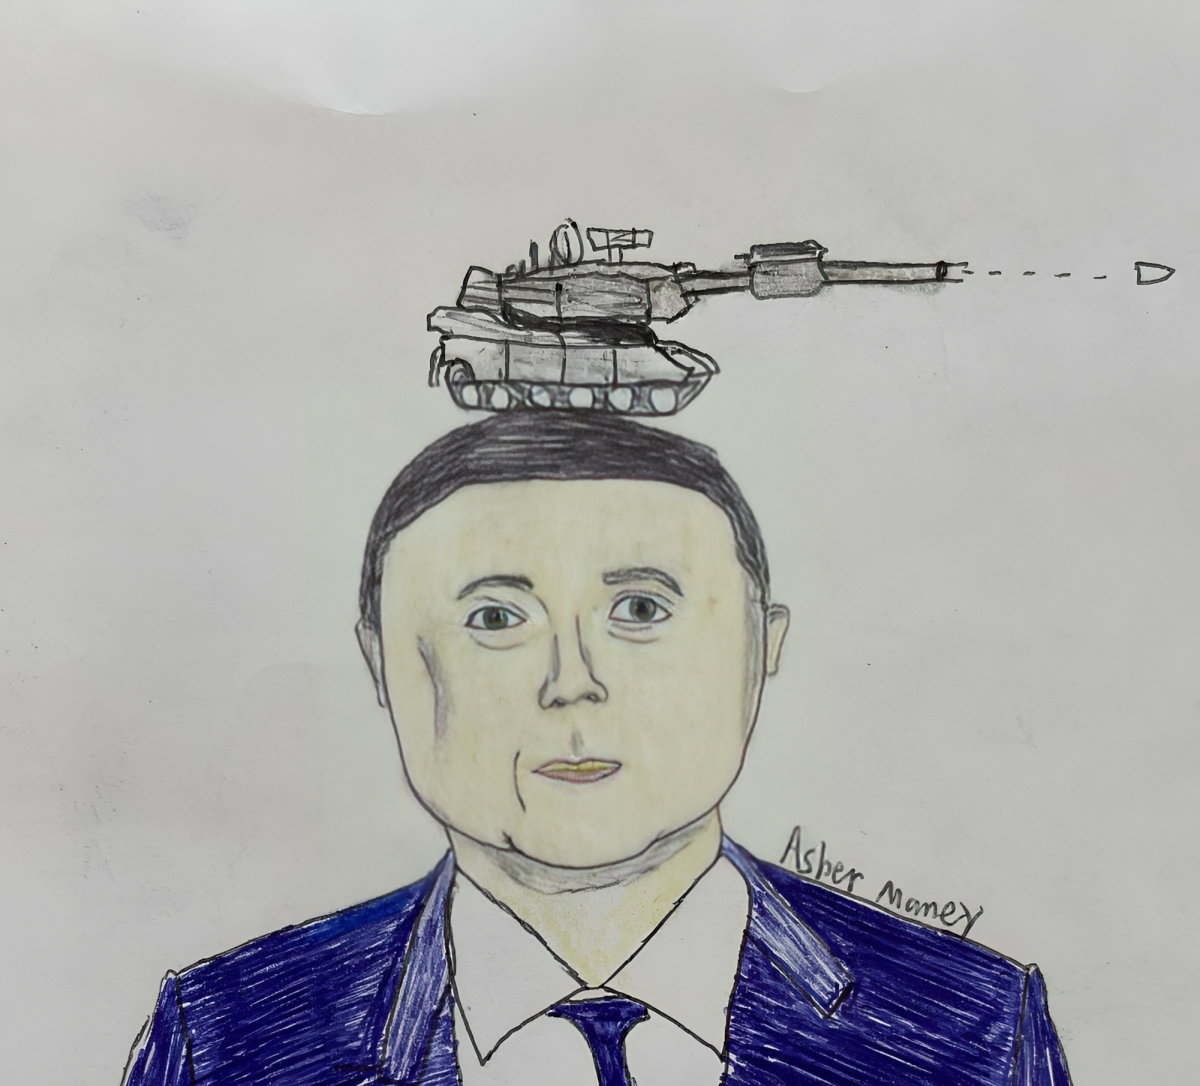 President Zelensky with an Abrams Tank on Top of His Head